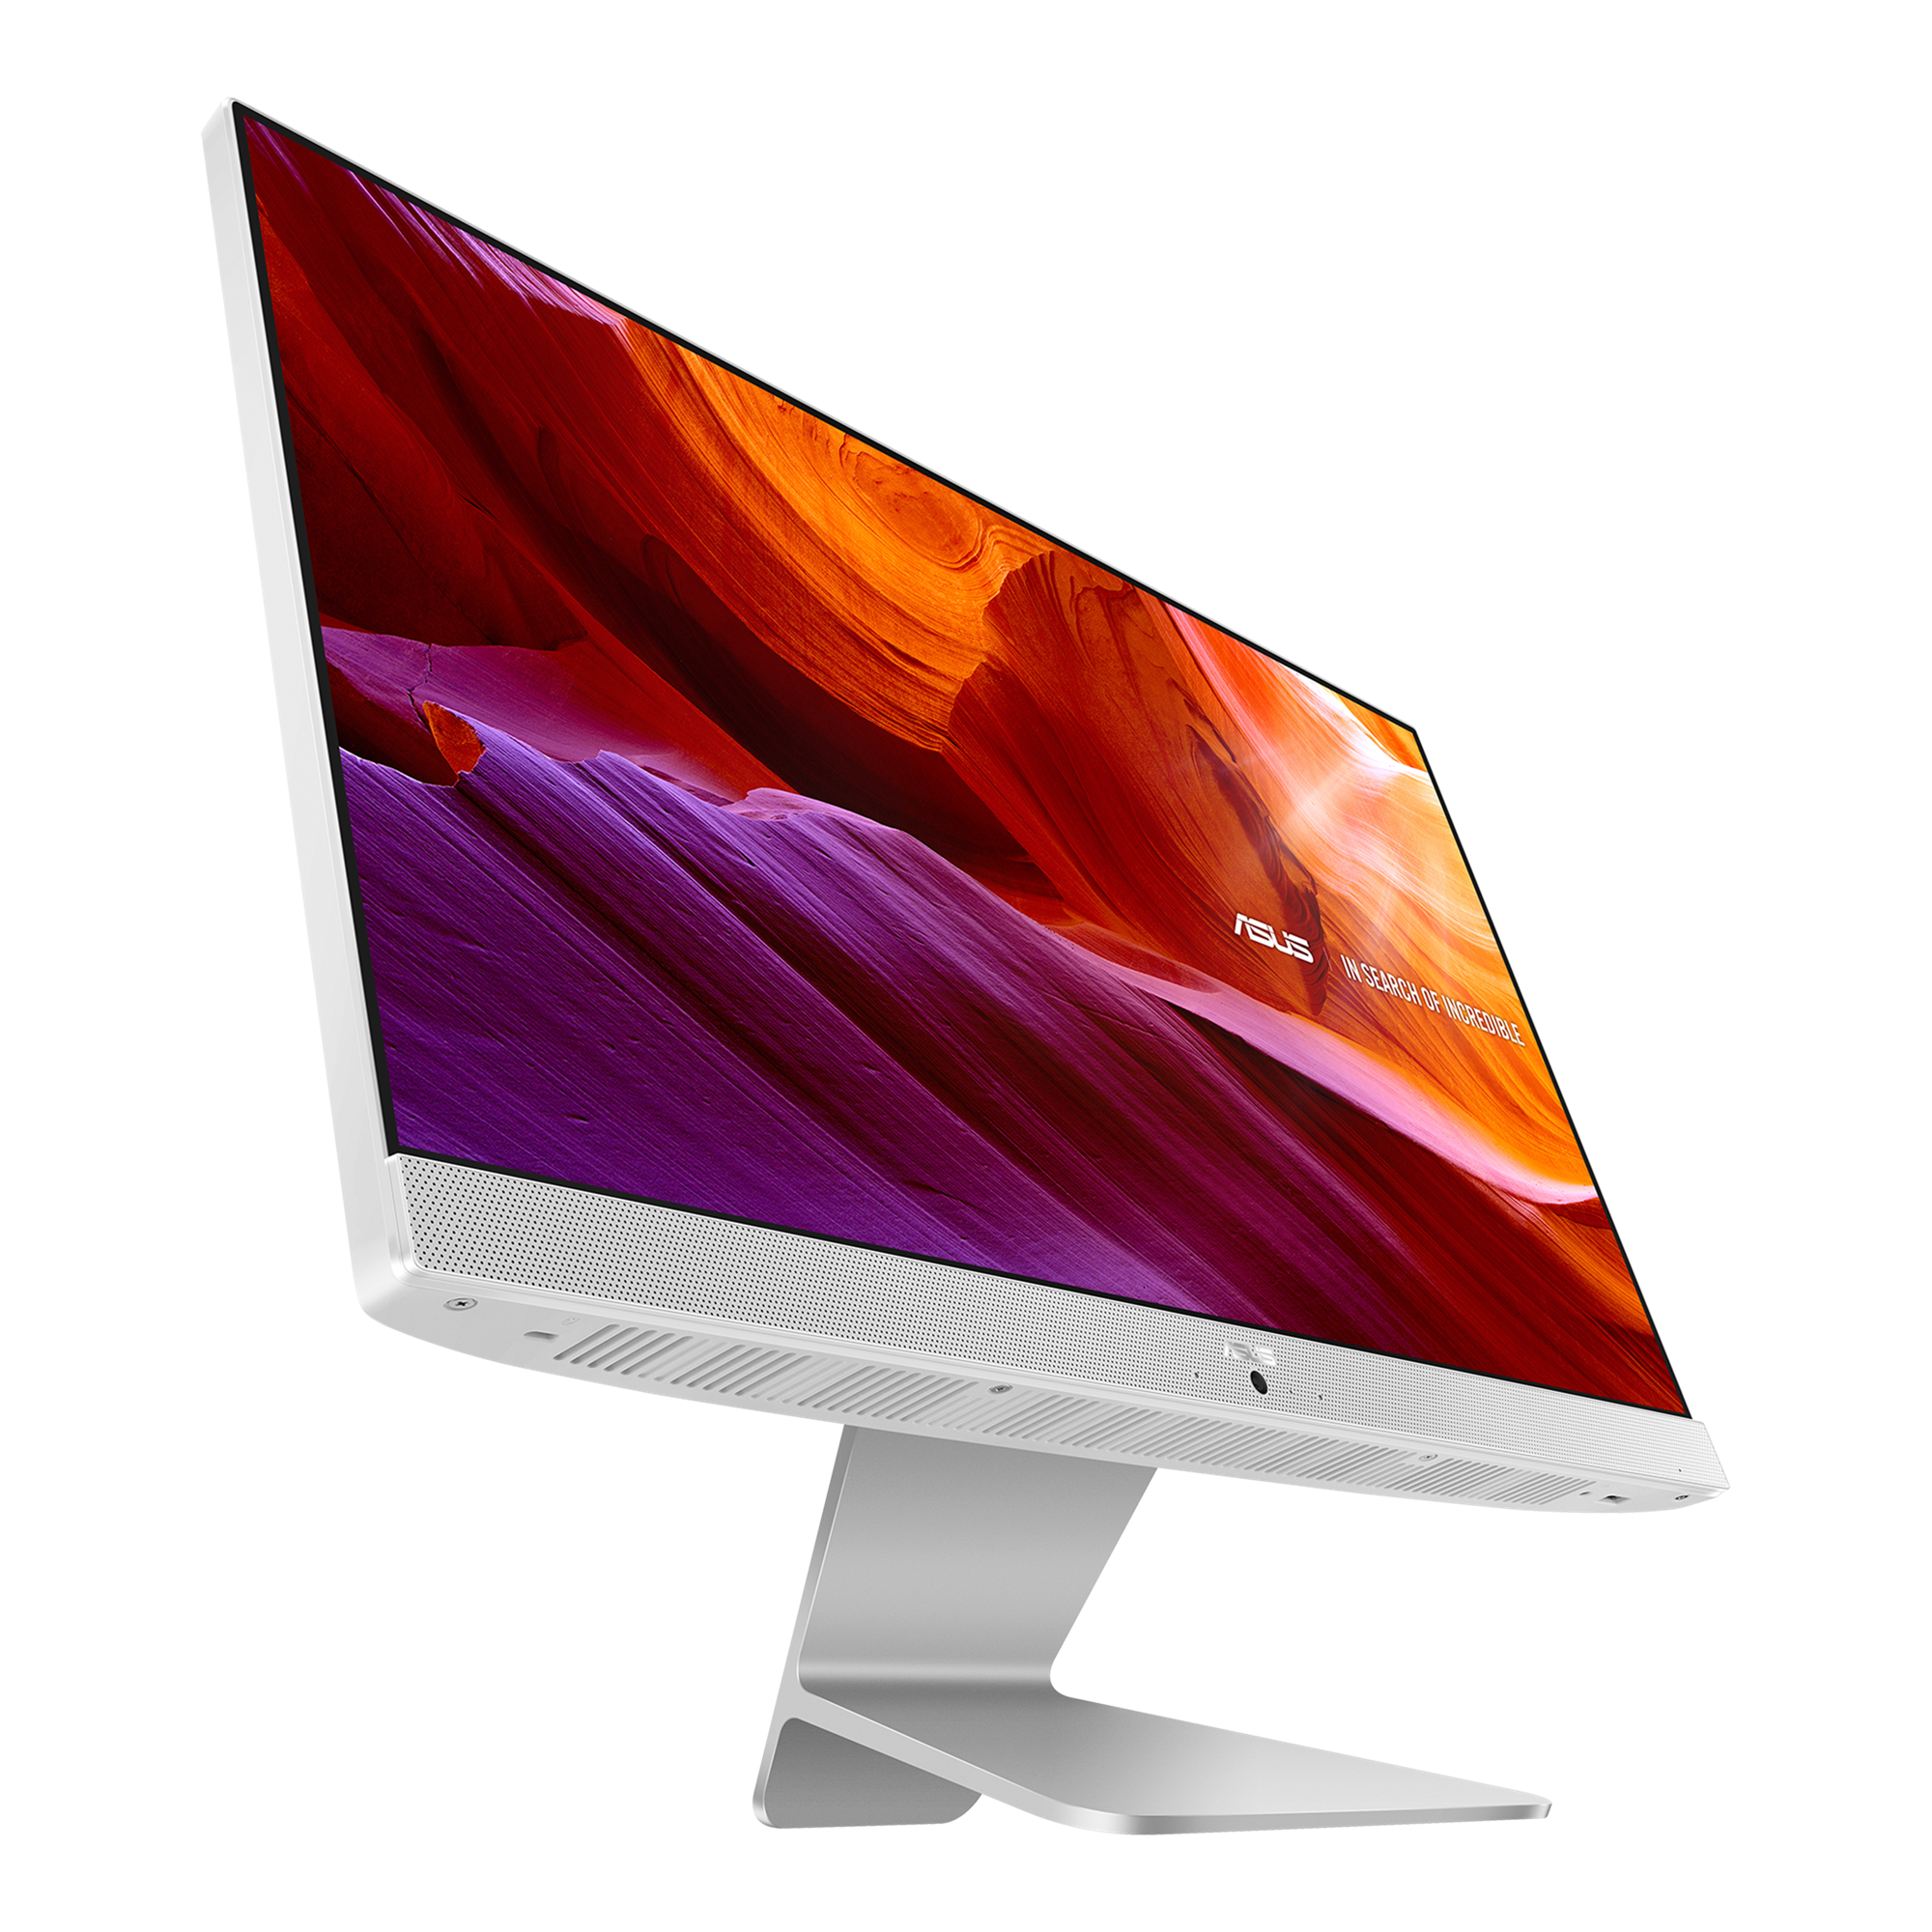 ASUS Vivo AIO 22 V222｜All-in-One PCs｜ASUS Malaysia